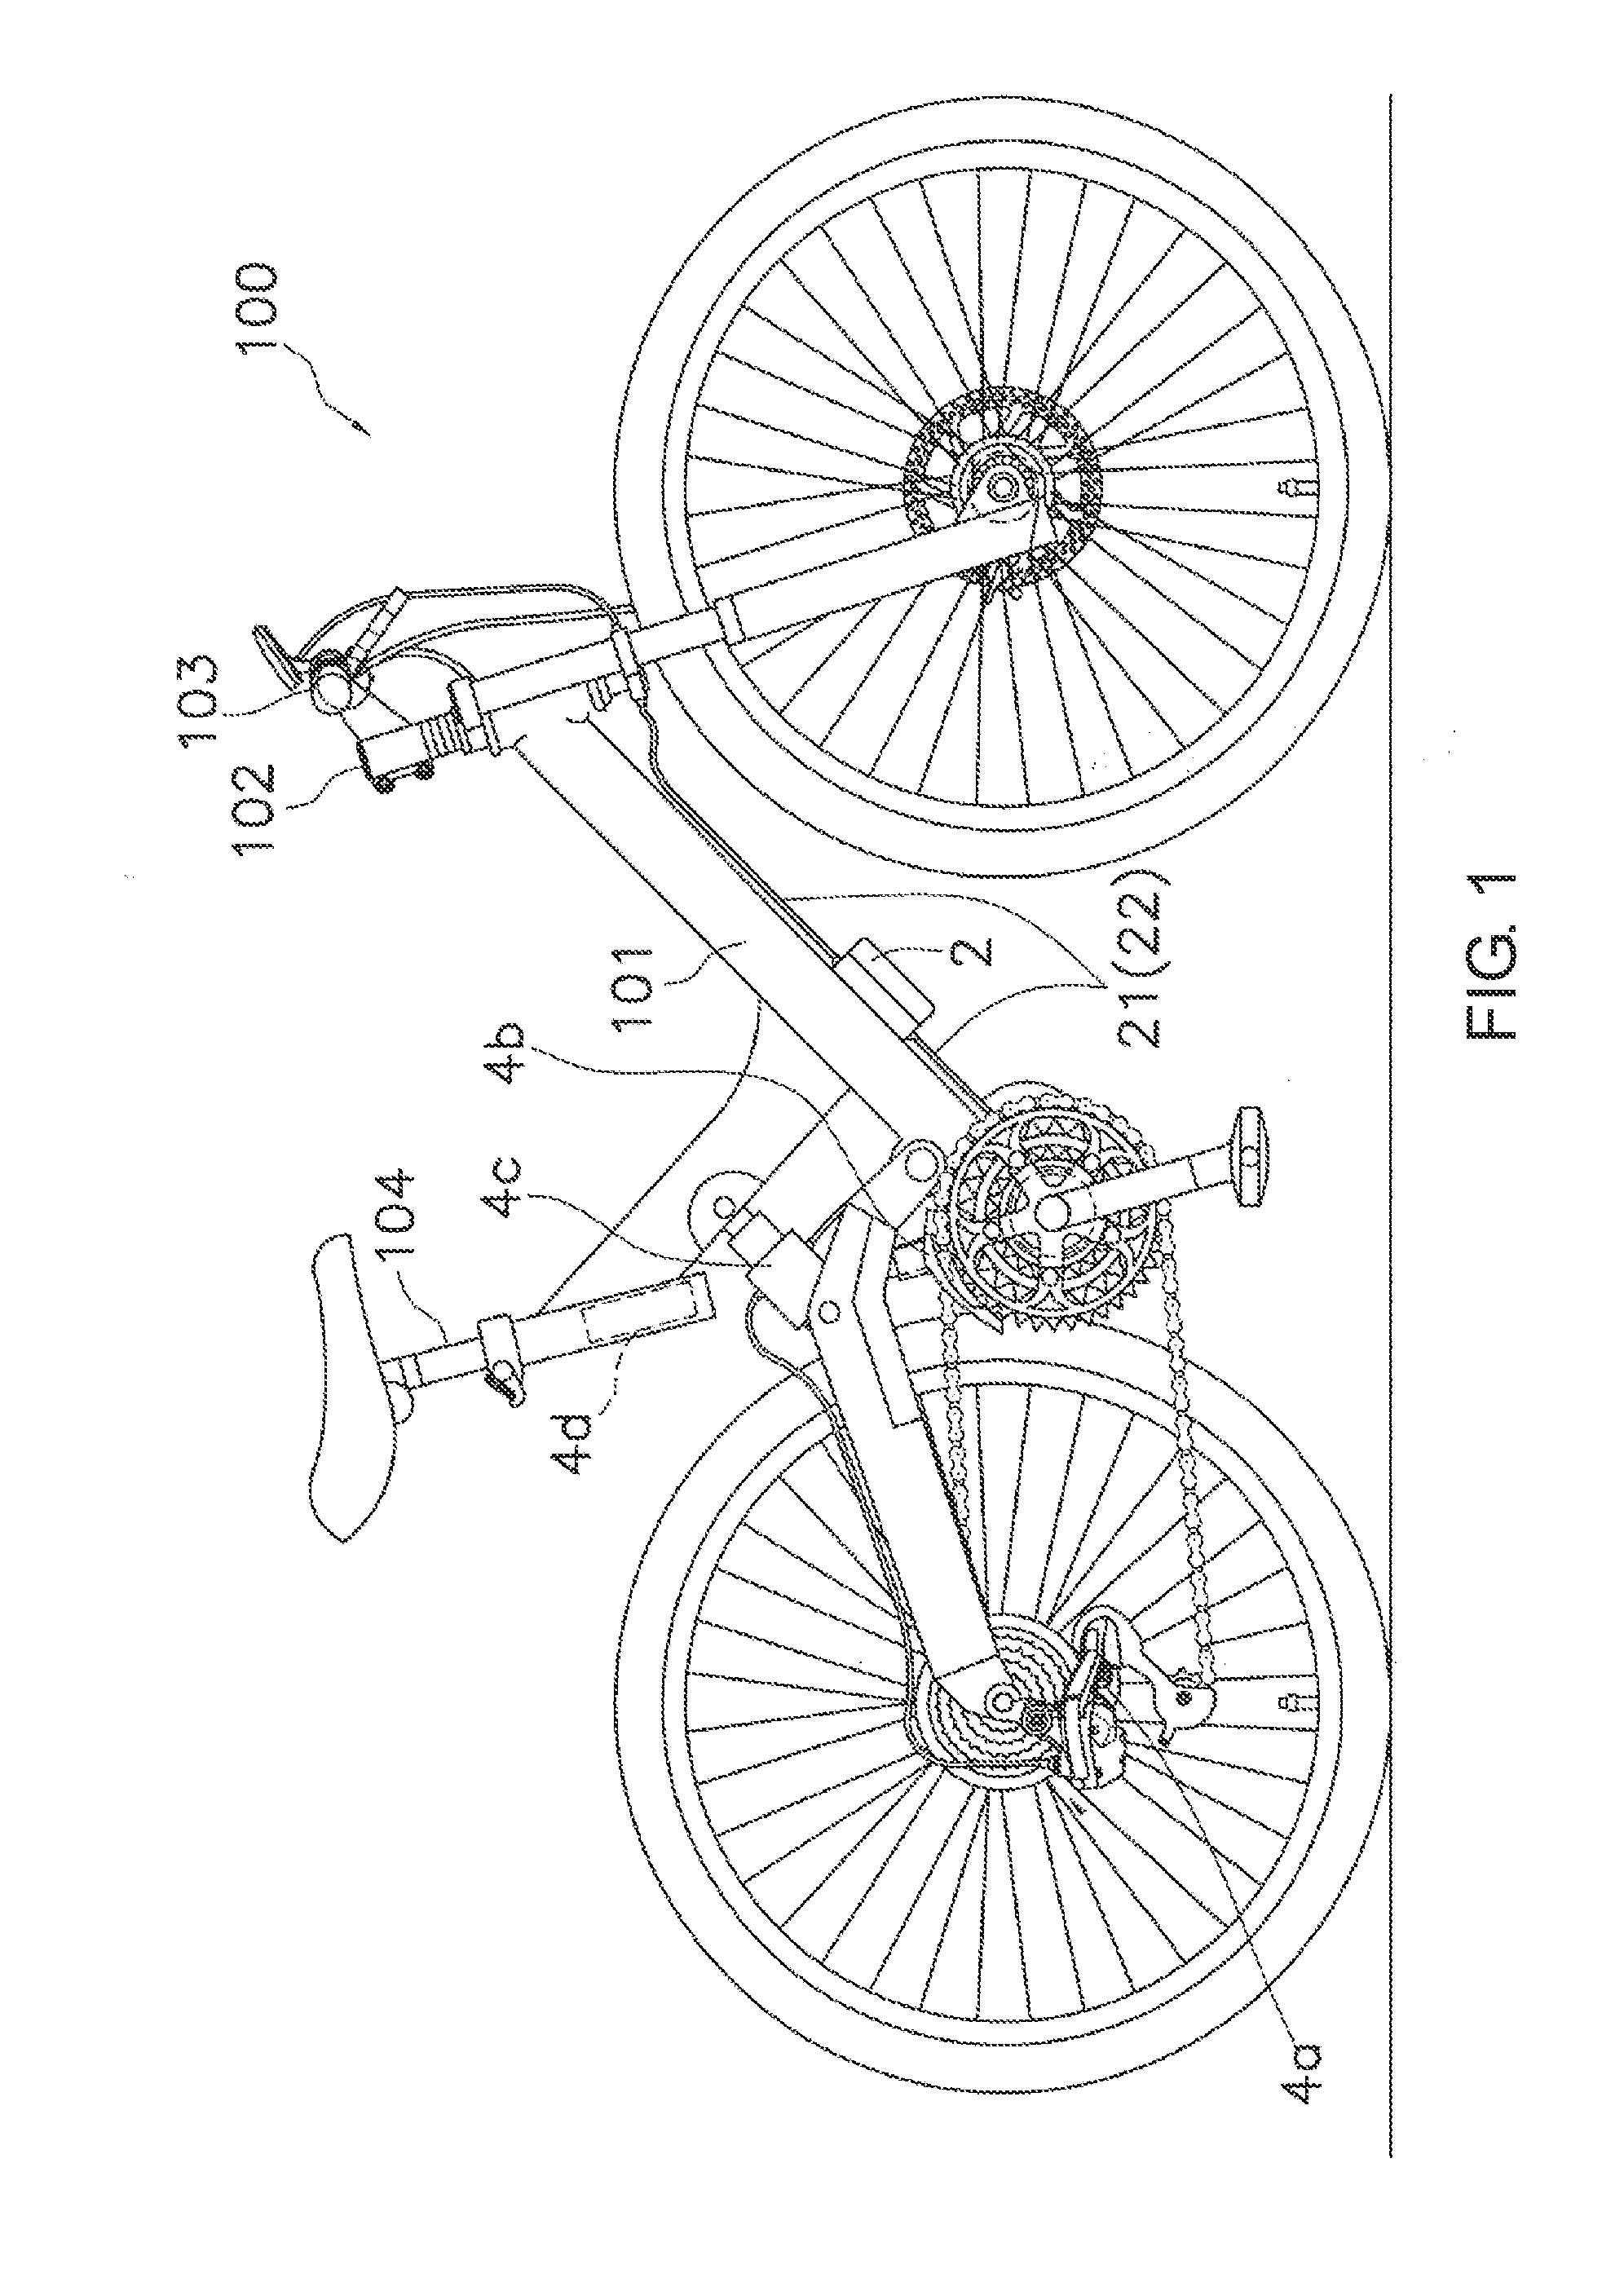 Bicycle control system